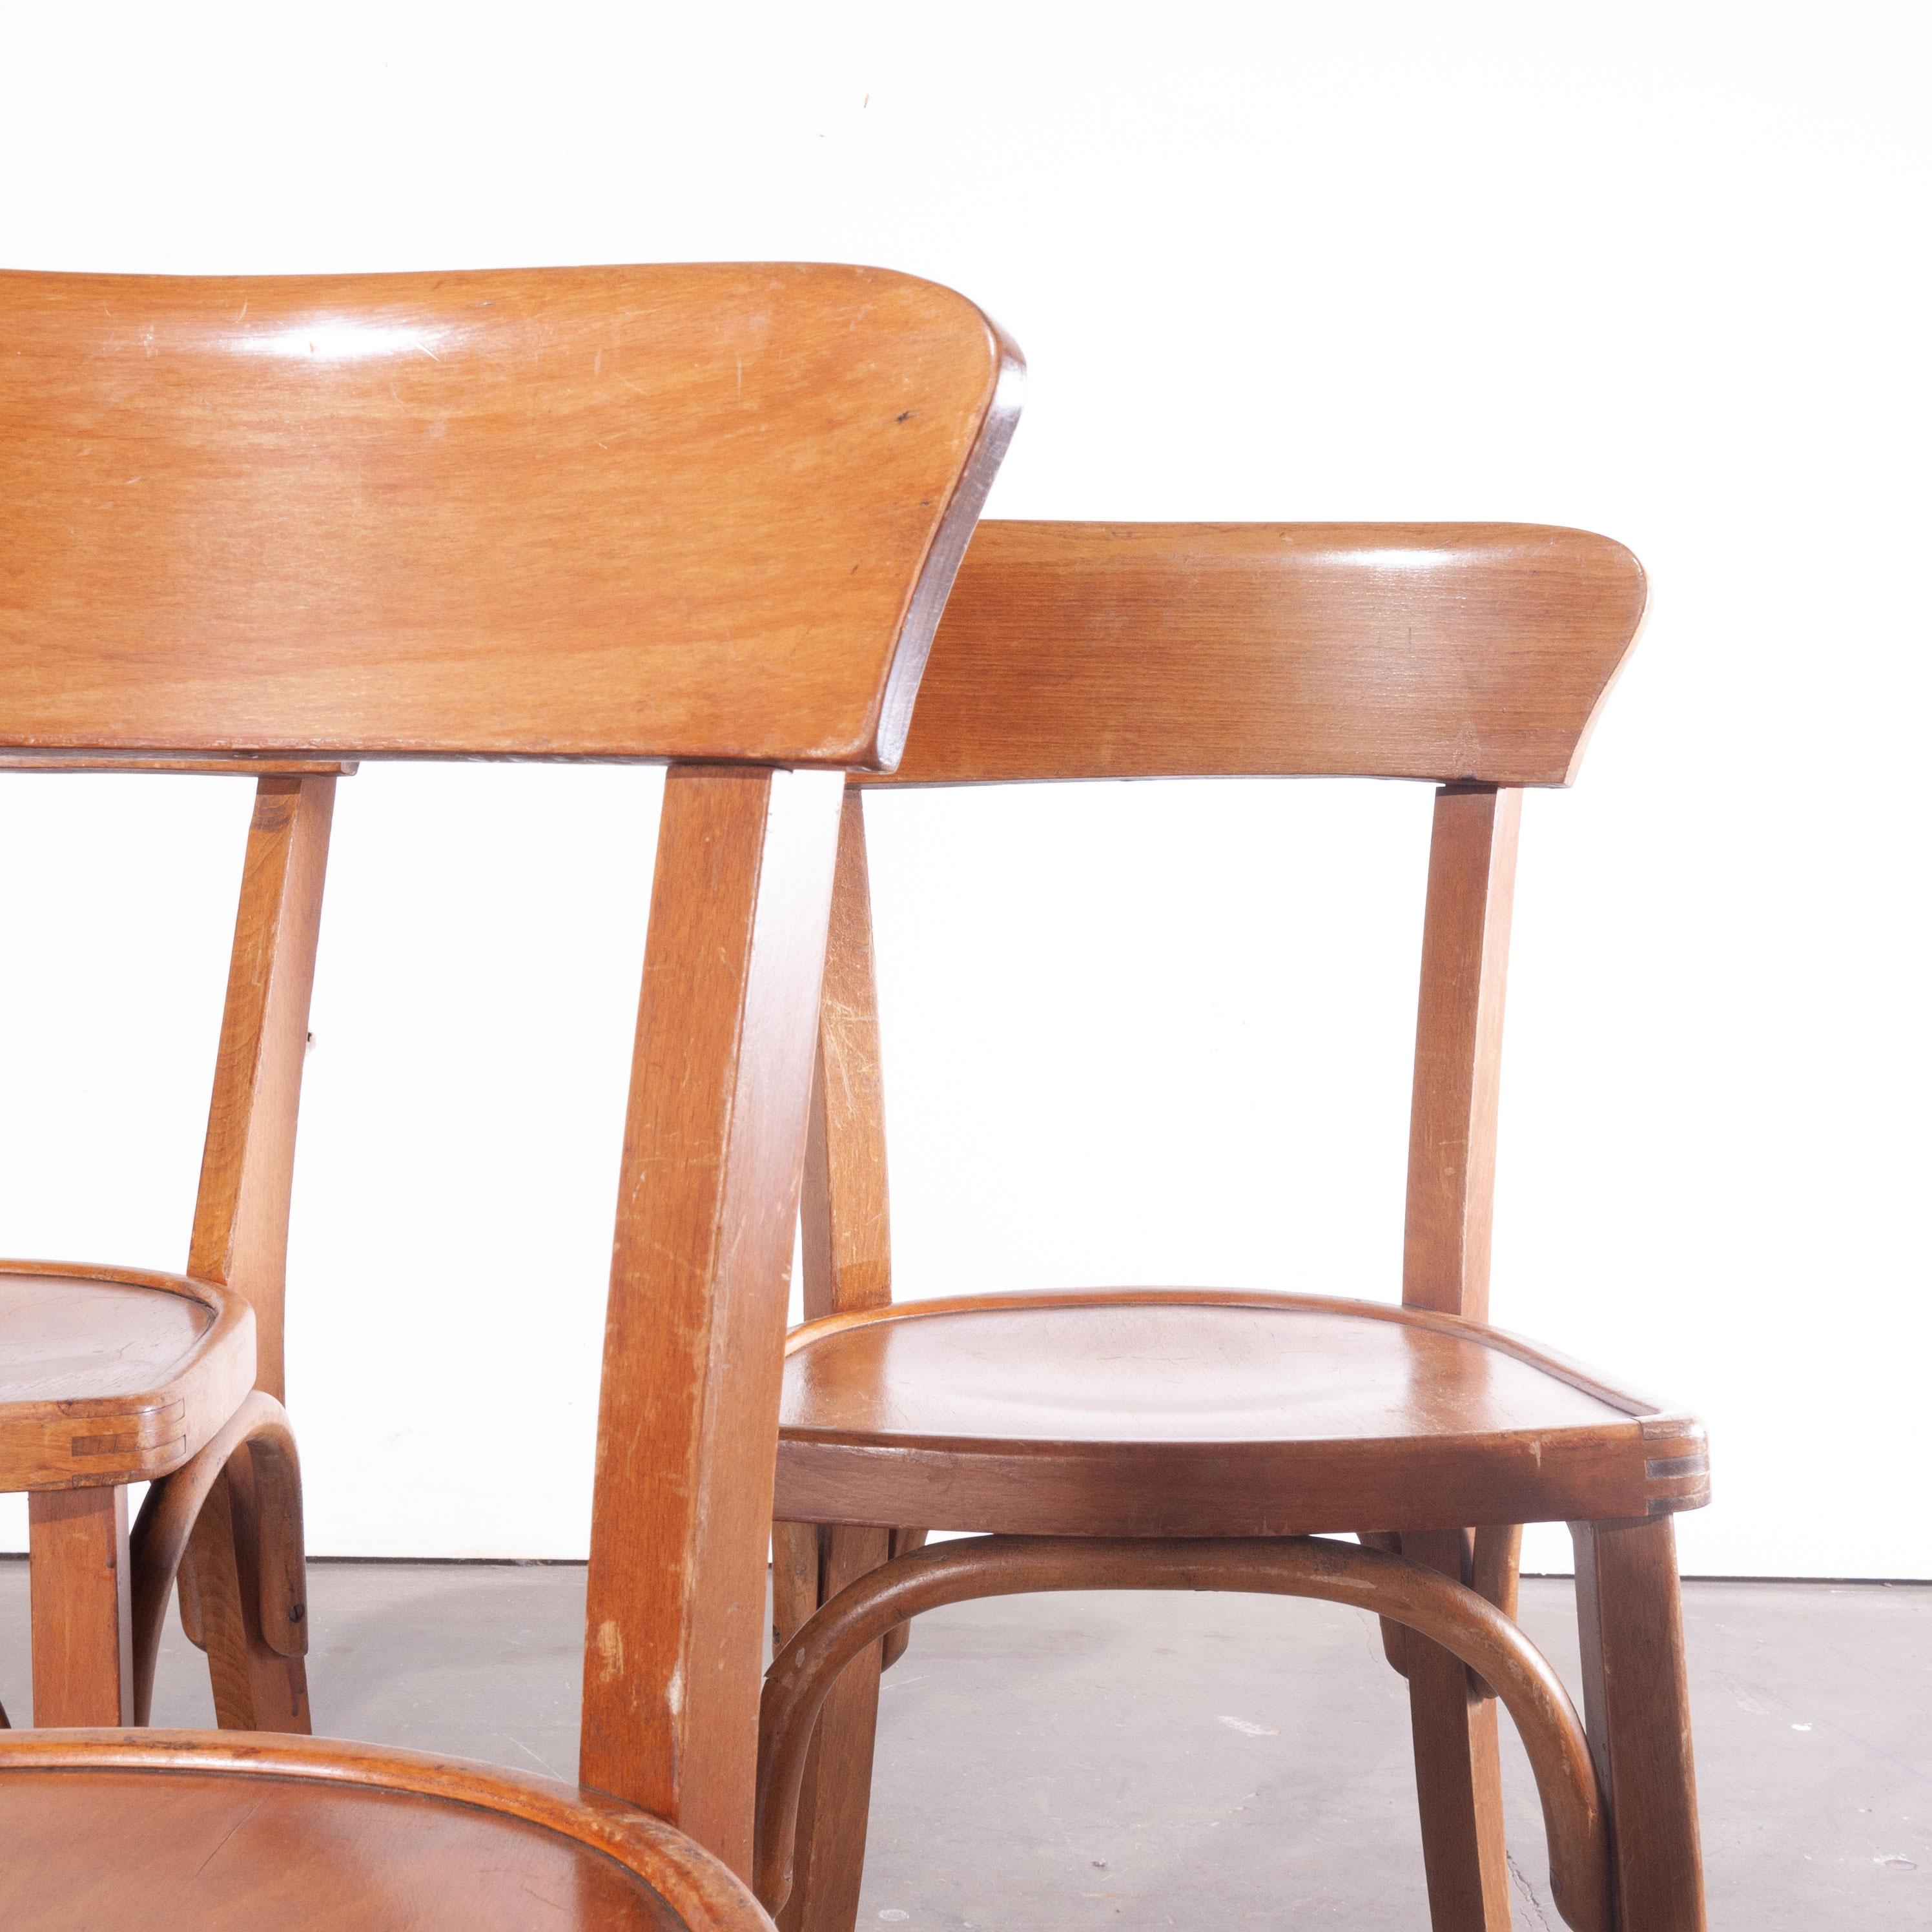 1950s bentwood bistro dining chairs, set of three
1950s bentwood bistro dining chairs, set of three. The concept of a bentwood chair was mastered by Thonet and these chairs are superb examples of the original bentwood production methods. This is a